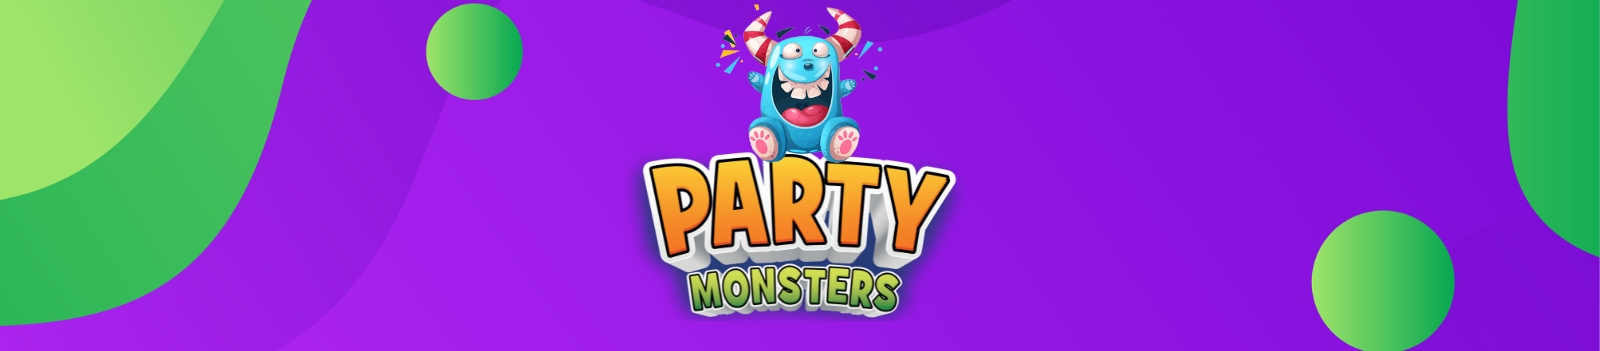 Party Monsters Entertainer Essex